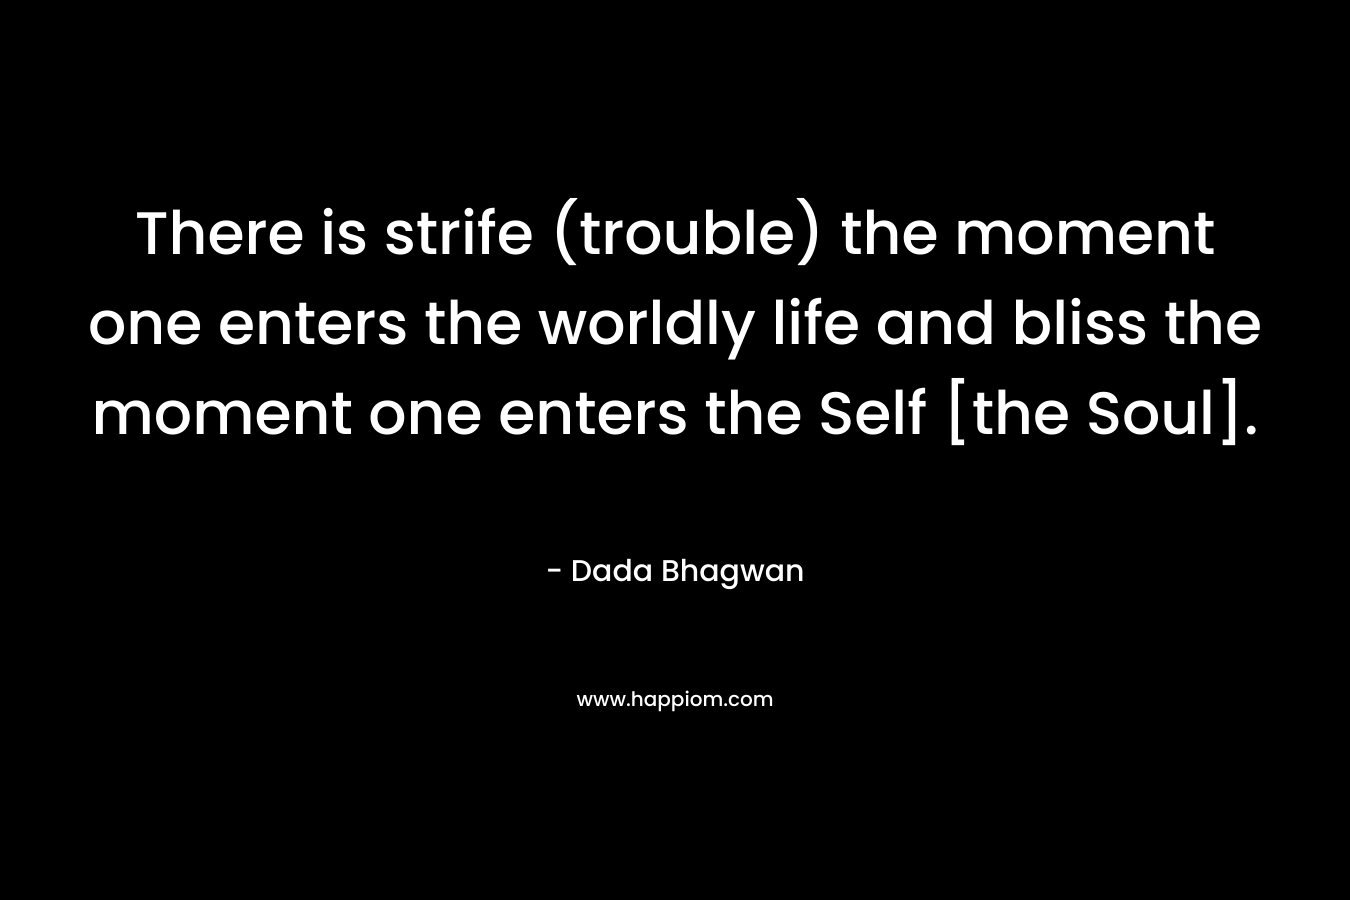 There is strife (trouble) the moment one enters the worldly life and bliss the moment one enters the Self [the Soul]. – Dada Bhagwan